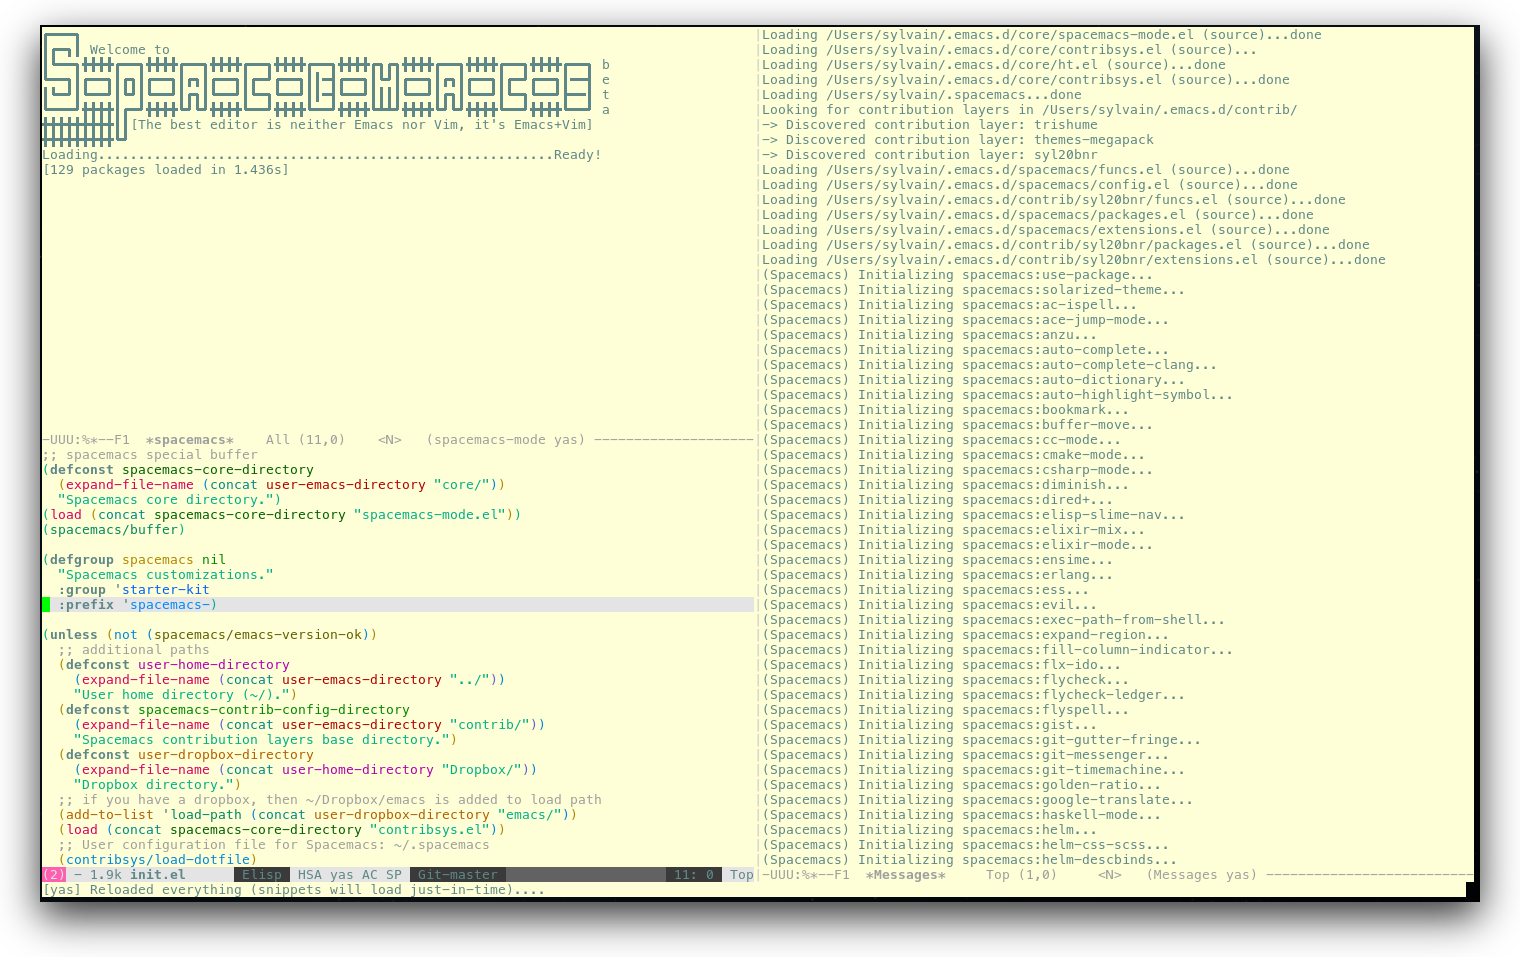 /TakeV/spacemacs/media/commit/5d04465c6968303eb3699a4a78a8536839f66014/doc/img/spacemacs-urxvt.png